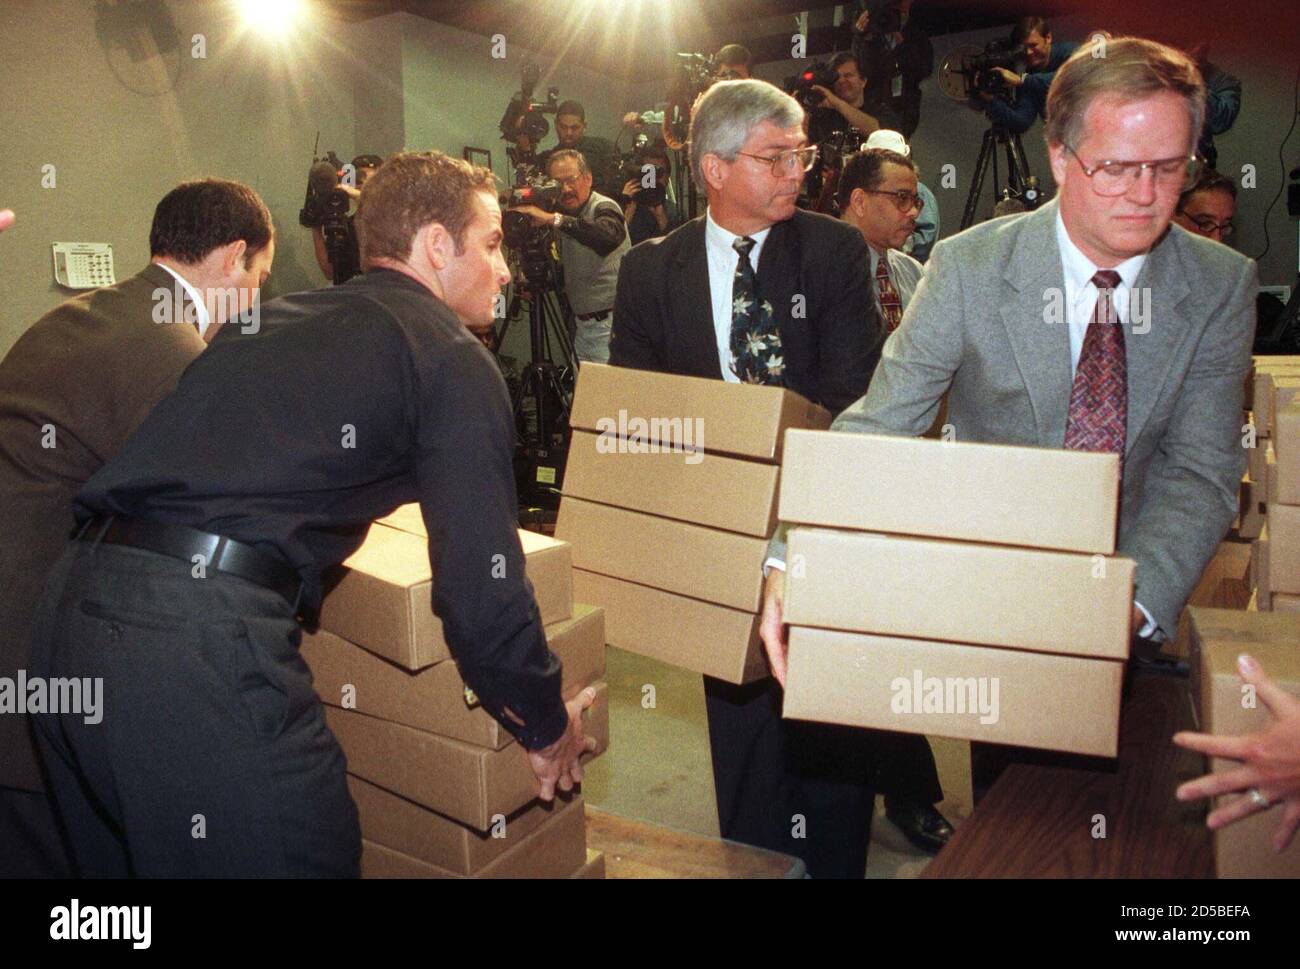 House Press Gallery staff members unload boxes of audio tapes of Monica Lewinsky's tales of her affair with President Bill Clinton that were released in the House Press Gallery on Capitol Hill November 17. The House Judiciary Committee released 22 hours of the tapes which were secretly recorded by Linda Tripp.  MMR/ELD/AA Stock Photo